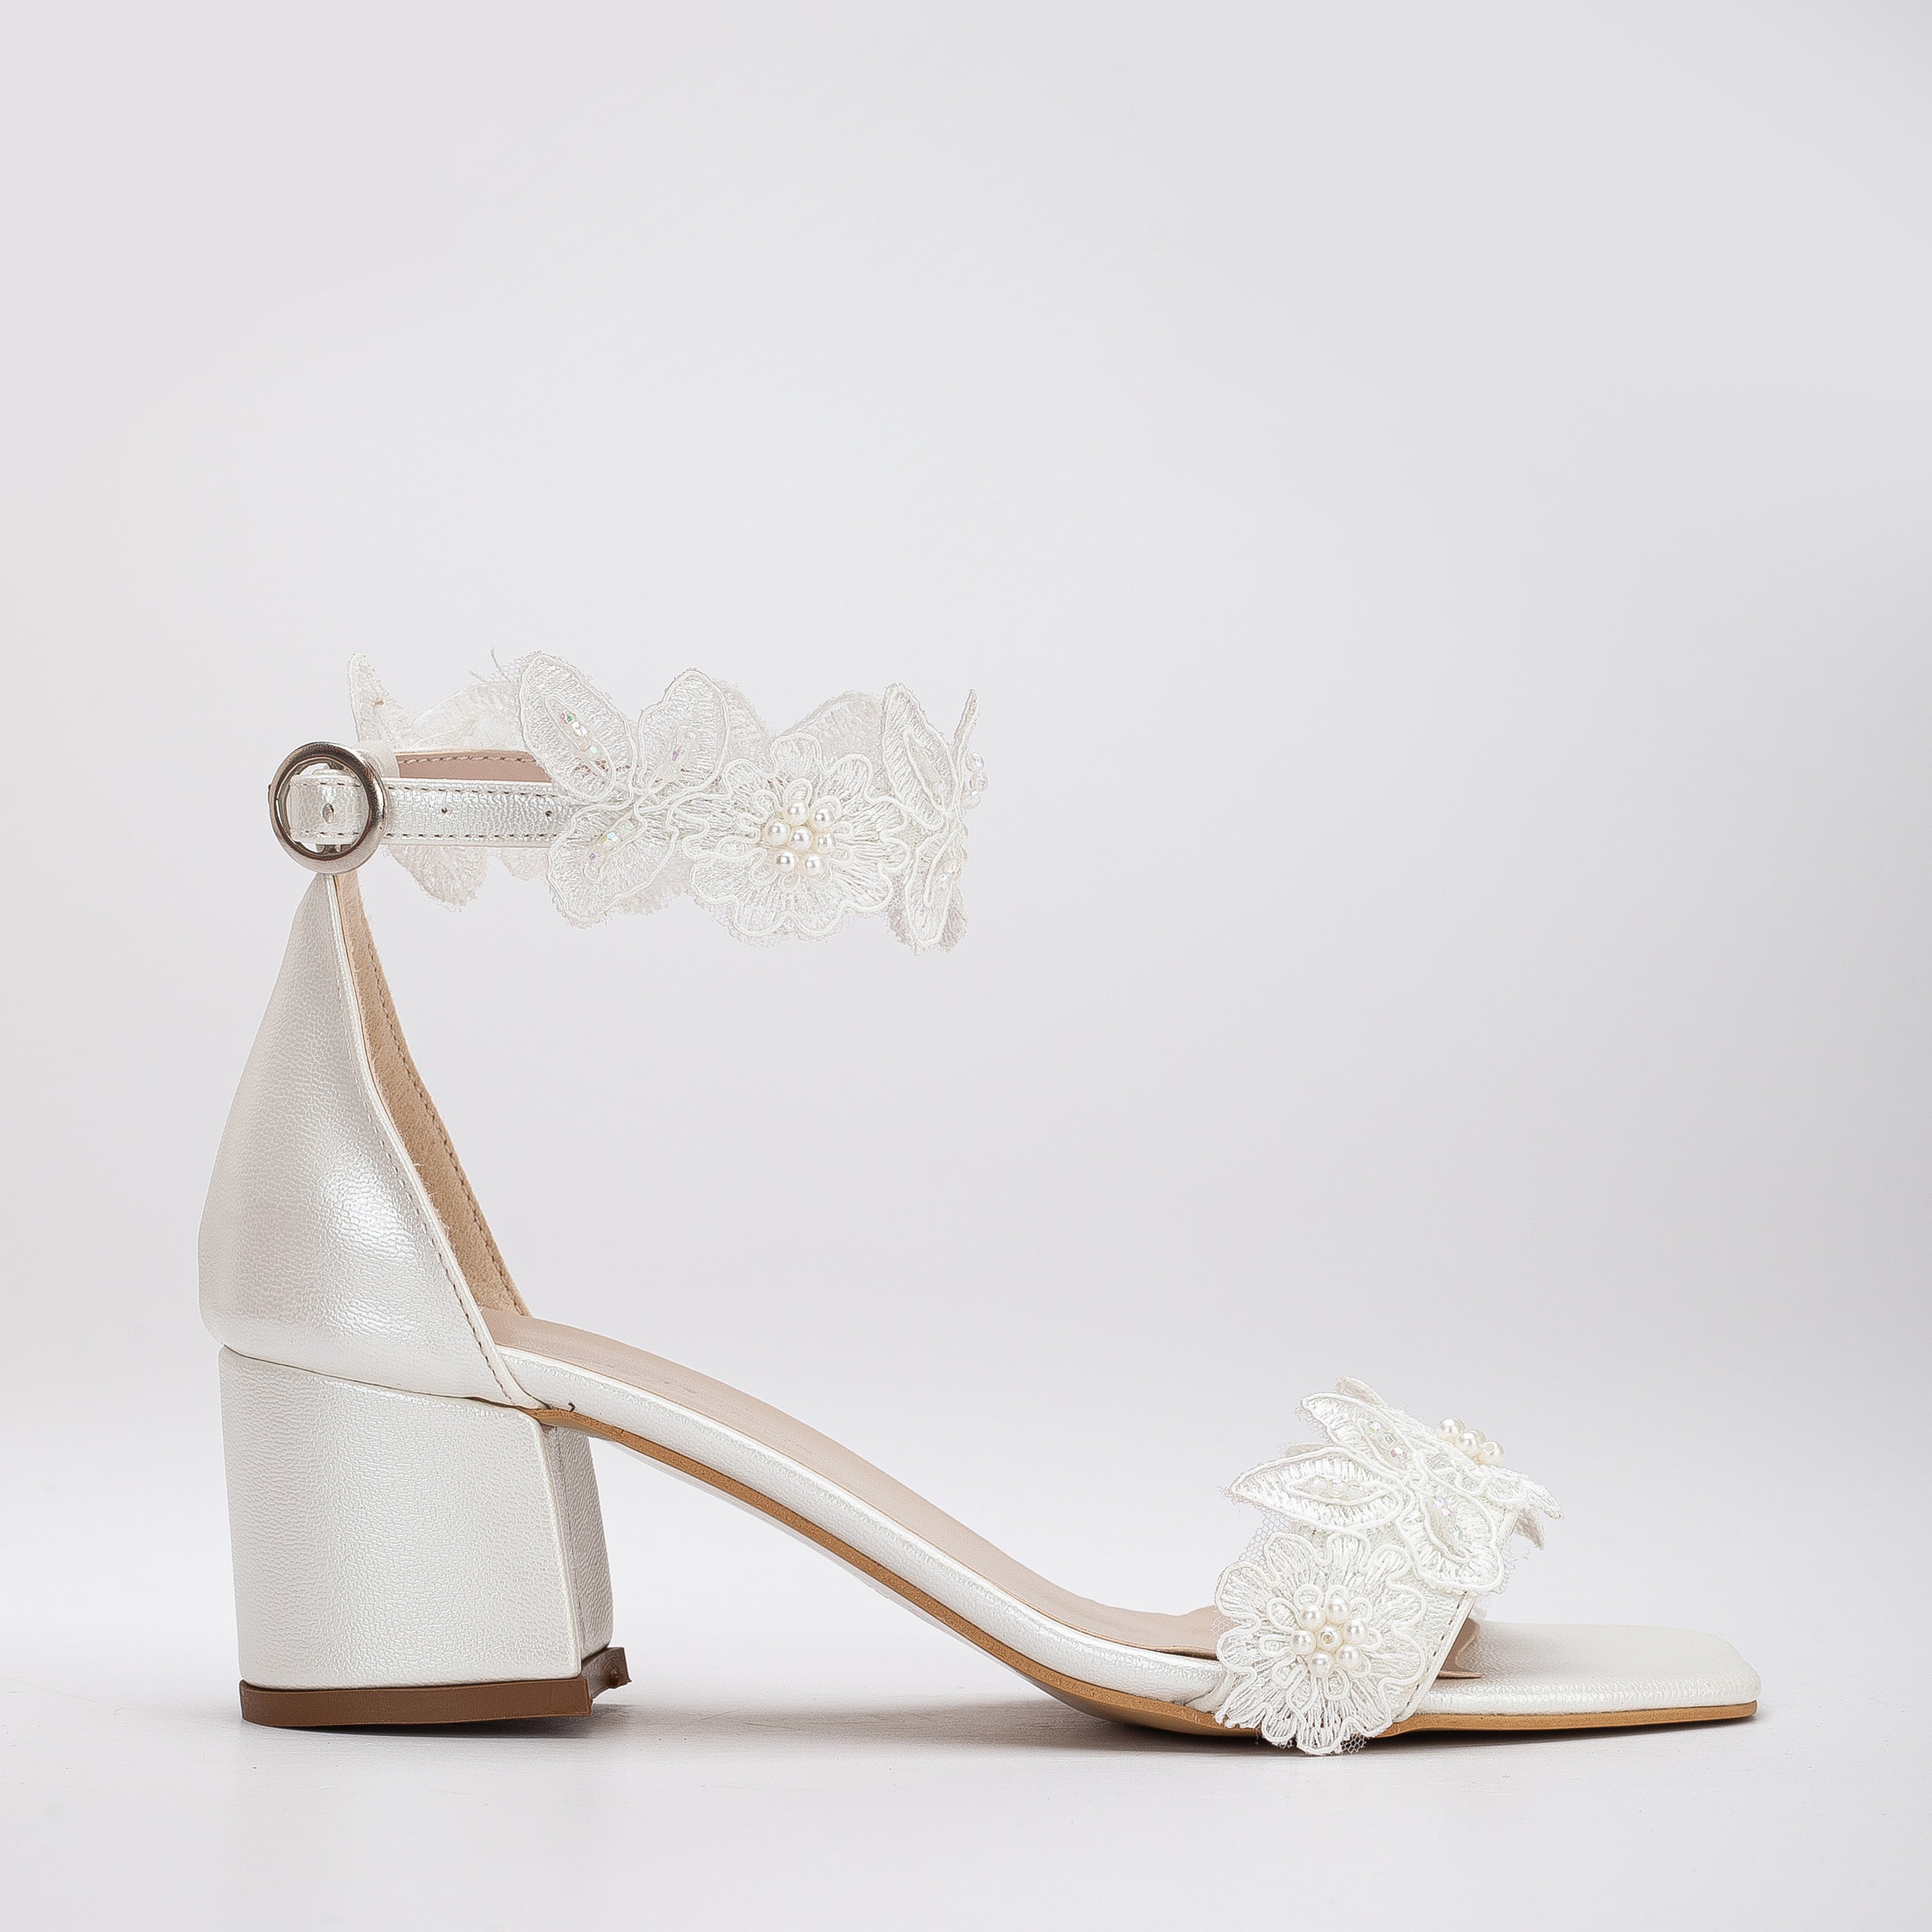 Timeless Wedding Vintage Shoes: 32 Ideas For Classic Brides